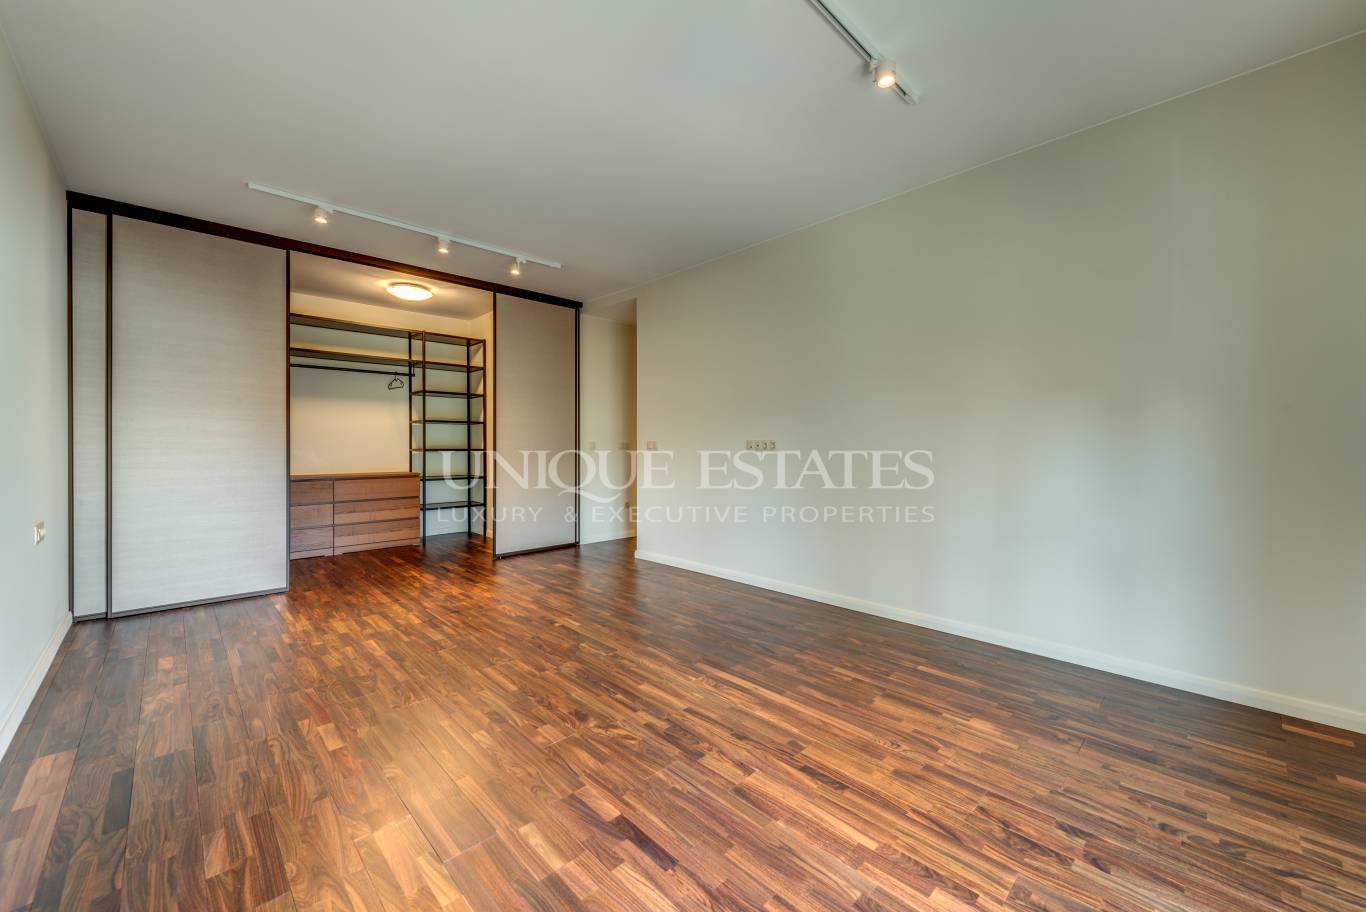 Apartment for rent in Sofia, Iztok with listing ID: N14860 - image 7